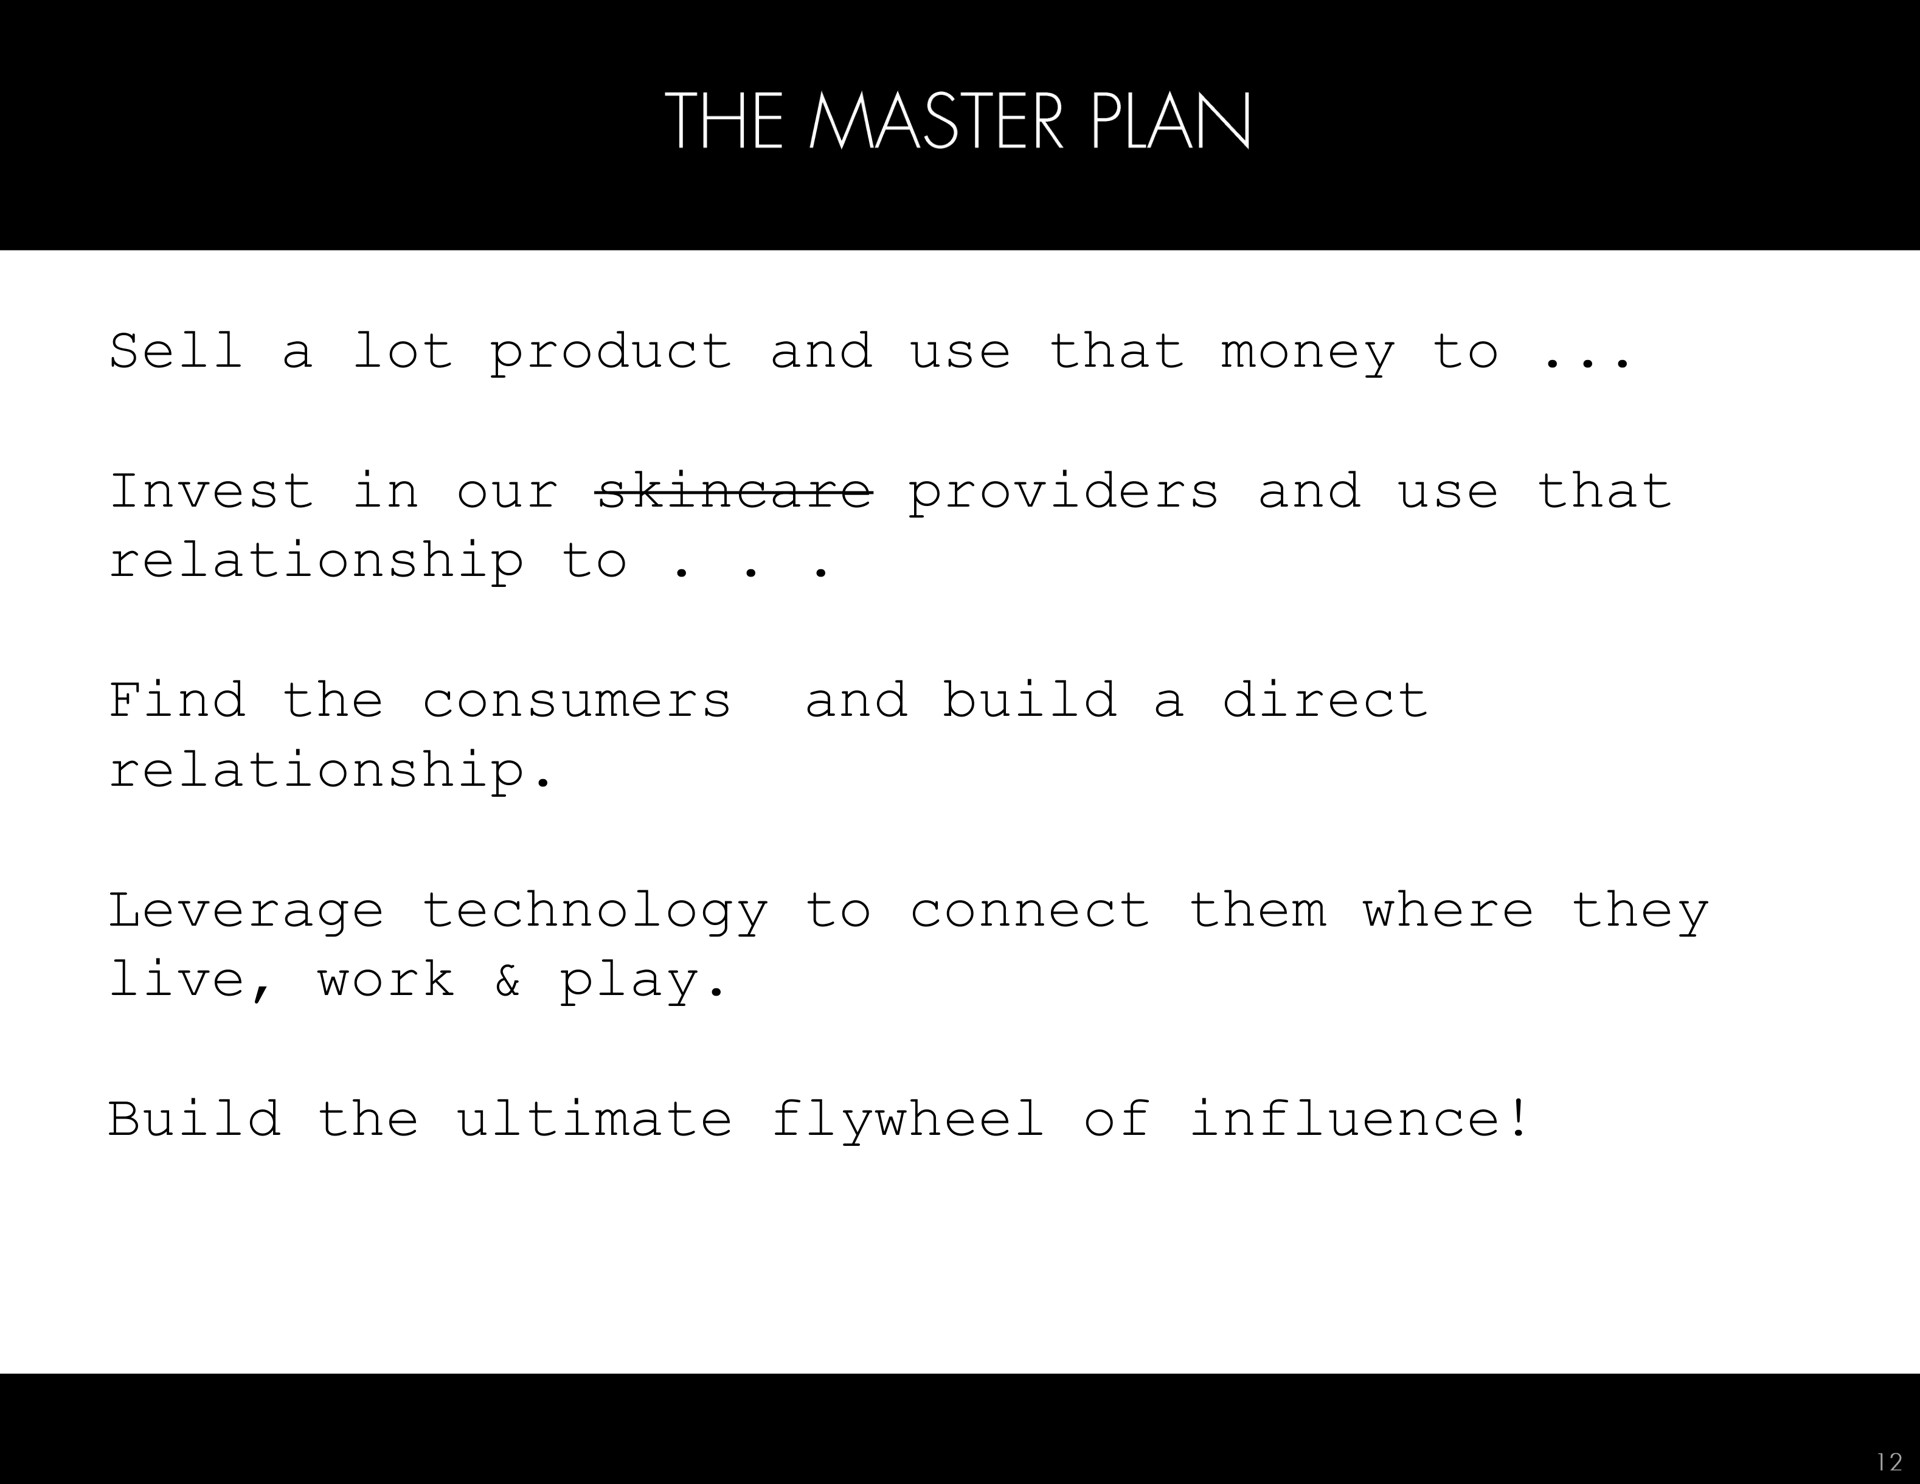 sell a lot product and use that money to invest in our providers and use that relationship to find the consumers and build a direct relationship leverage technology to connect them where they live work play build the ultimate flywheel of influence master plan | Hydrafacial